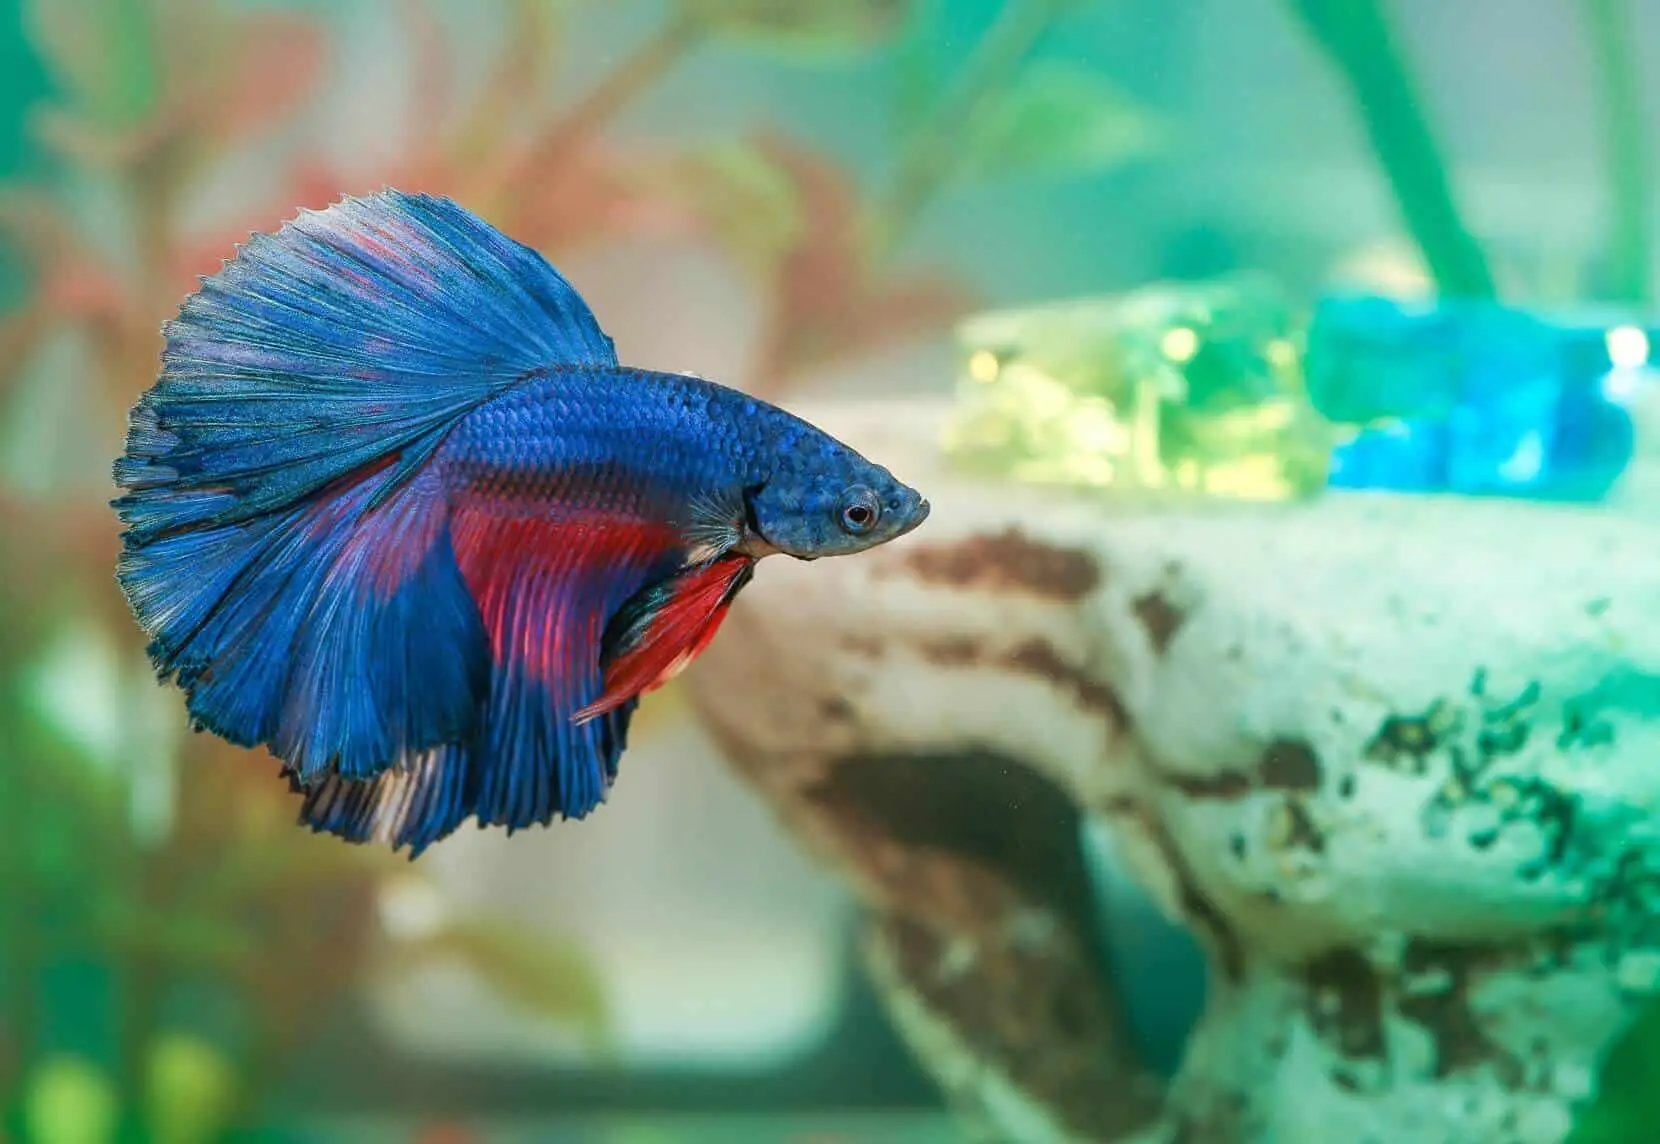 Betta my why fish keep dying do How Can